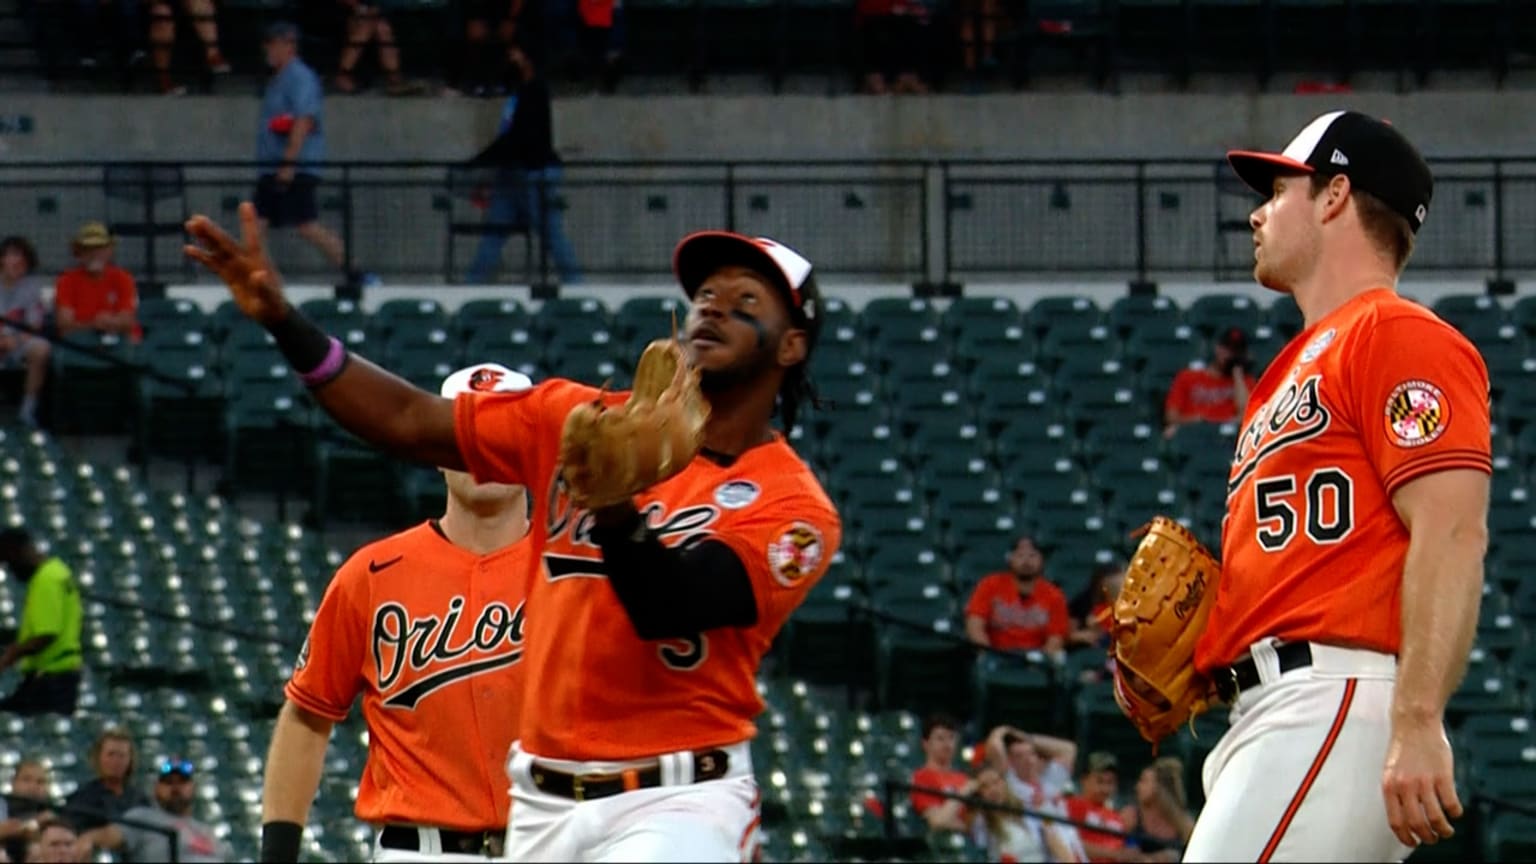 Birdland Insider: Jorge Mateo: Spreading Happiness On and Off the Field